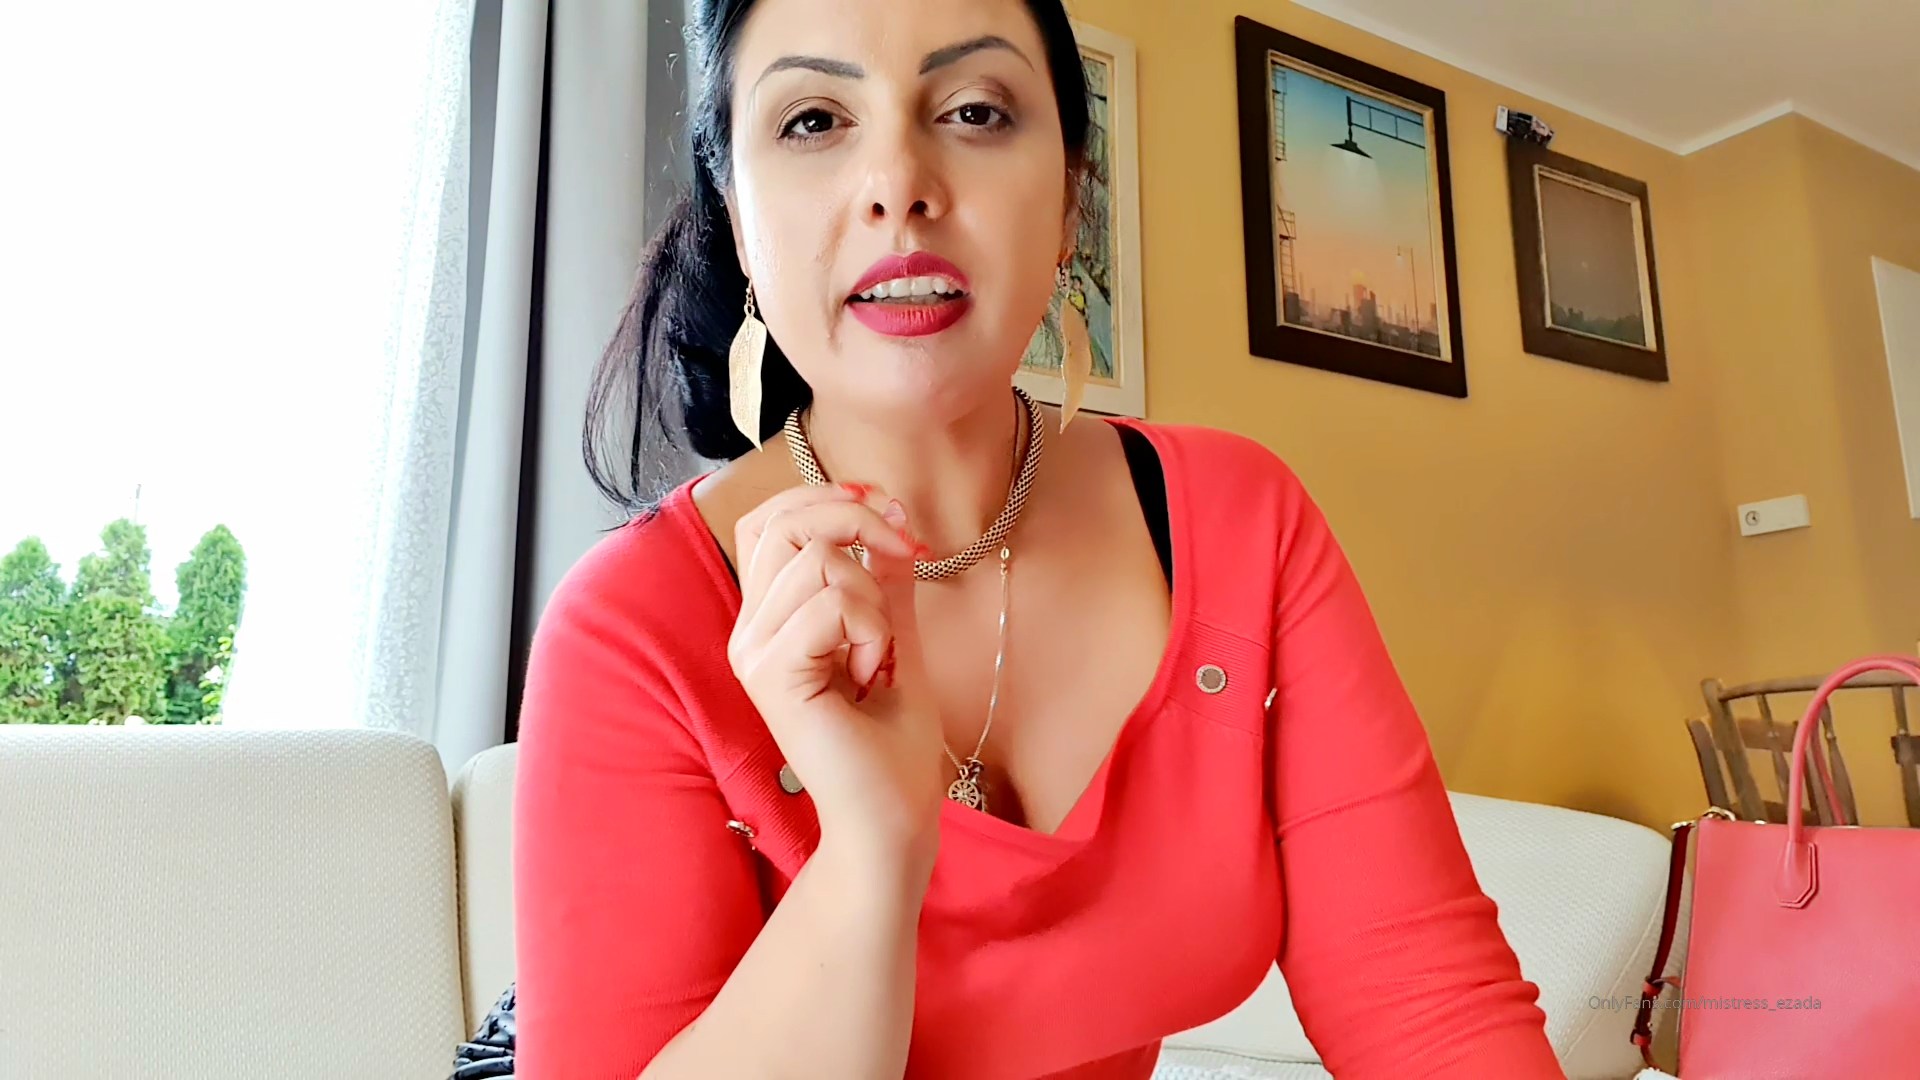 Ruined Orgasm Method 9 - The Chemical Ruined Tehnique - EZADA SINN ONLYFANS - FULL HD/1080p/MP4